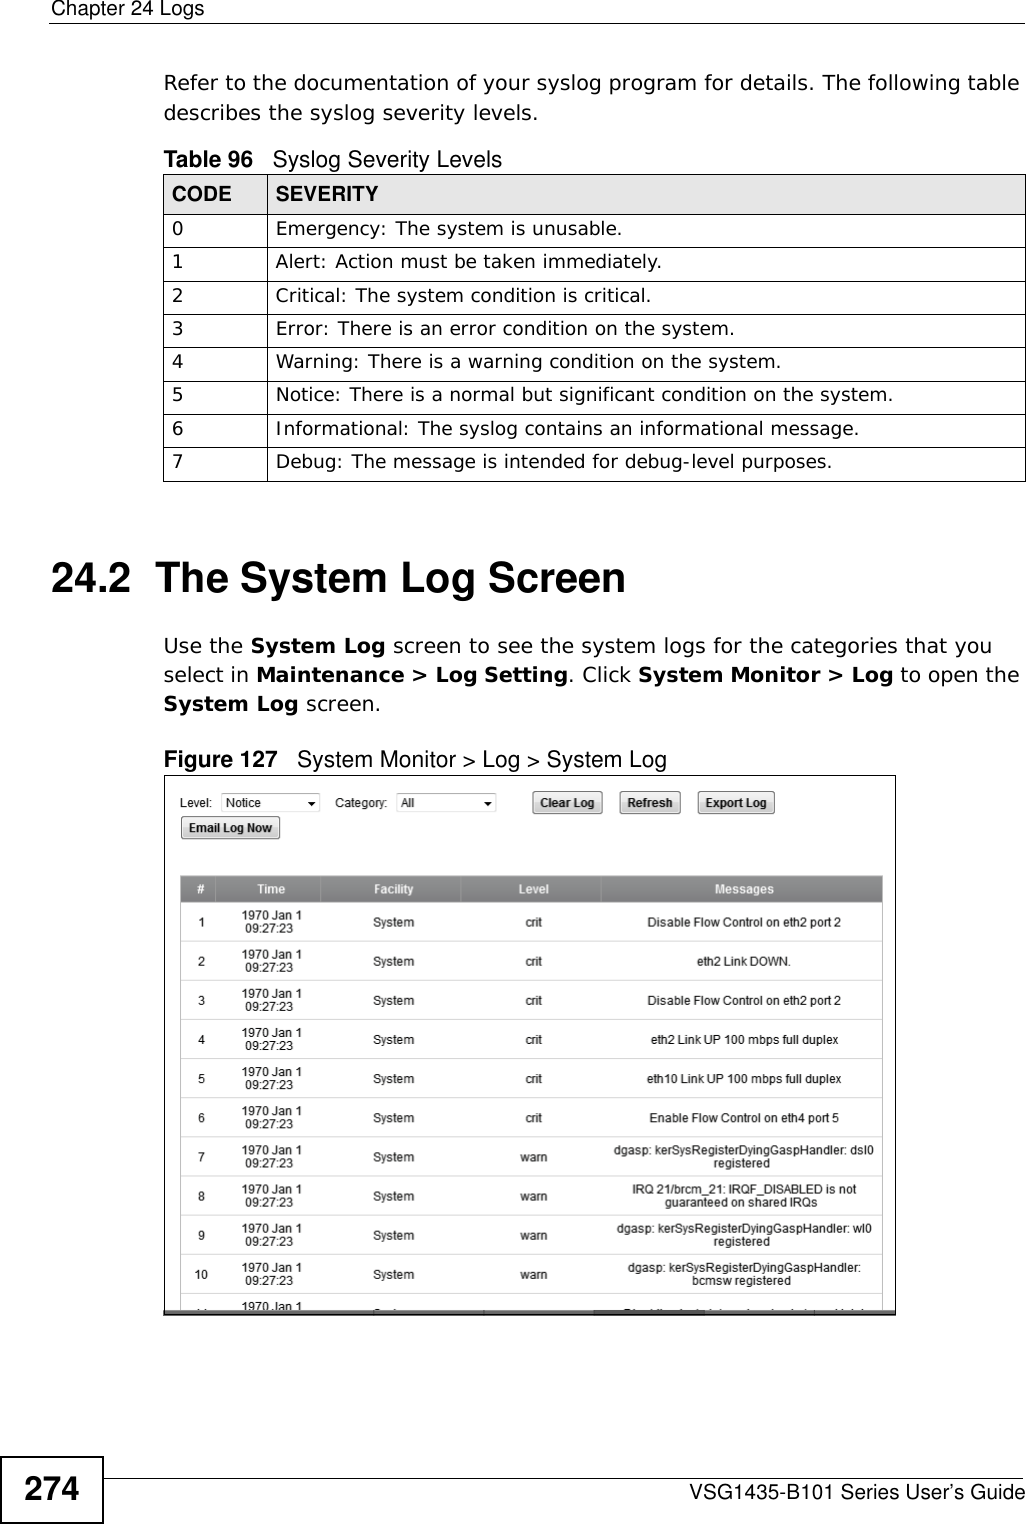 Chapter 24 LogsVSG1435-B101 Series User’s Guide274Refer to the documentation of your syslog program for details. The following table describes the syslog severity levels. 24.2  The System Log Screen Use the System Log screen to see the system logs for the categories that you select in Maintenance &gt; Log Setting. Click System Monitor &gt; Log to open the System Log screen. Figure 127   System Monitor &gt; Log &gt; System LogTable 96   Syslog Severity LevelsCODE SEVERITY0 Emergency: The system is unusable.1 Alert: Action must be taken immediately.2 Critical: The system condition is critical.3 Error: There is an error condition on the system.4 Warning: There is a warning condition on the system.5 Notice: There is a normal but significant condition on the system.6 Informational: The syslog contains an informational message.7 Debug: The message is intended for debug-level purposes.